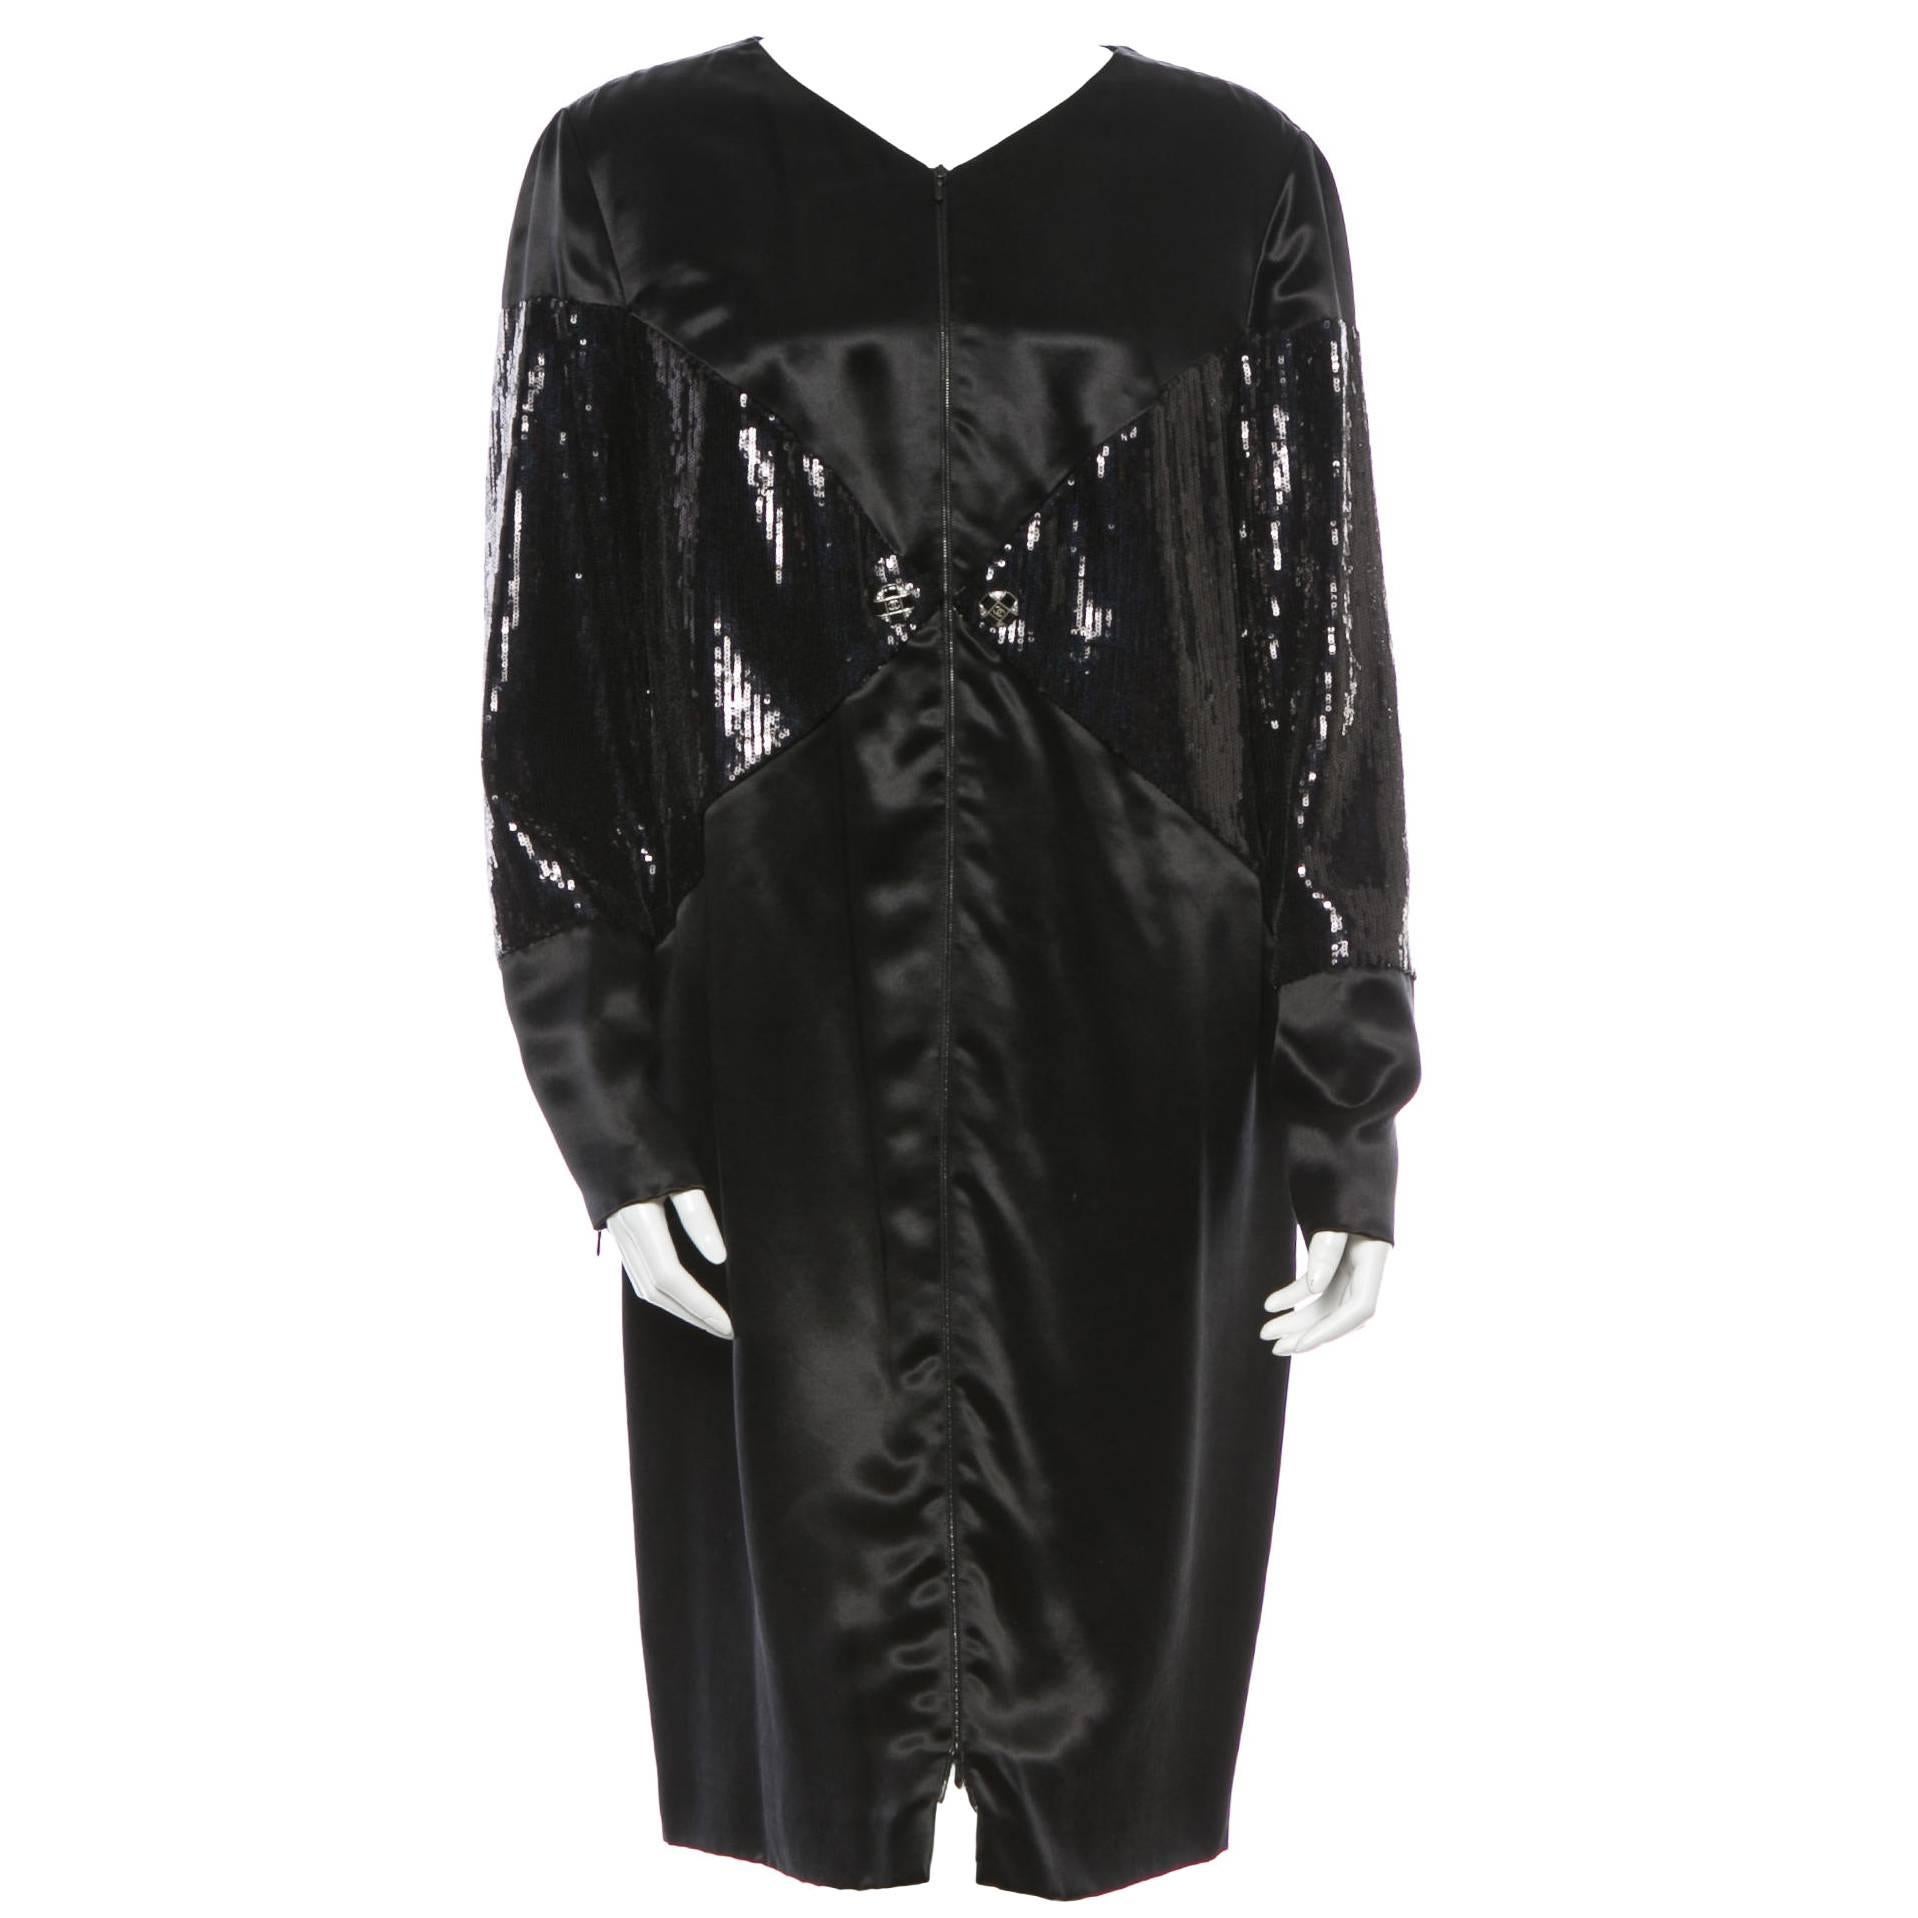 Chanel Black Satin and Sequin Midi Mid Length Long Sleeve Cocktail Gown Dress